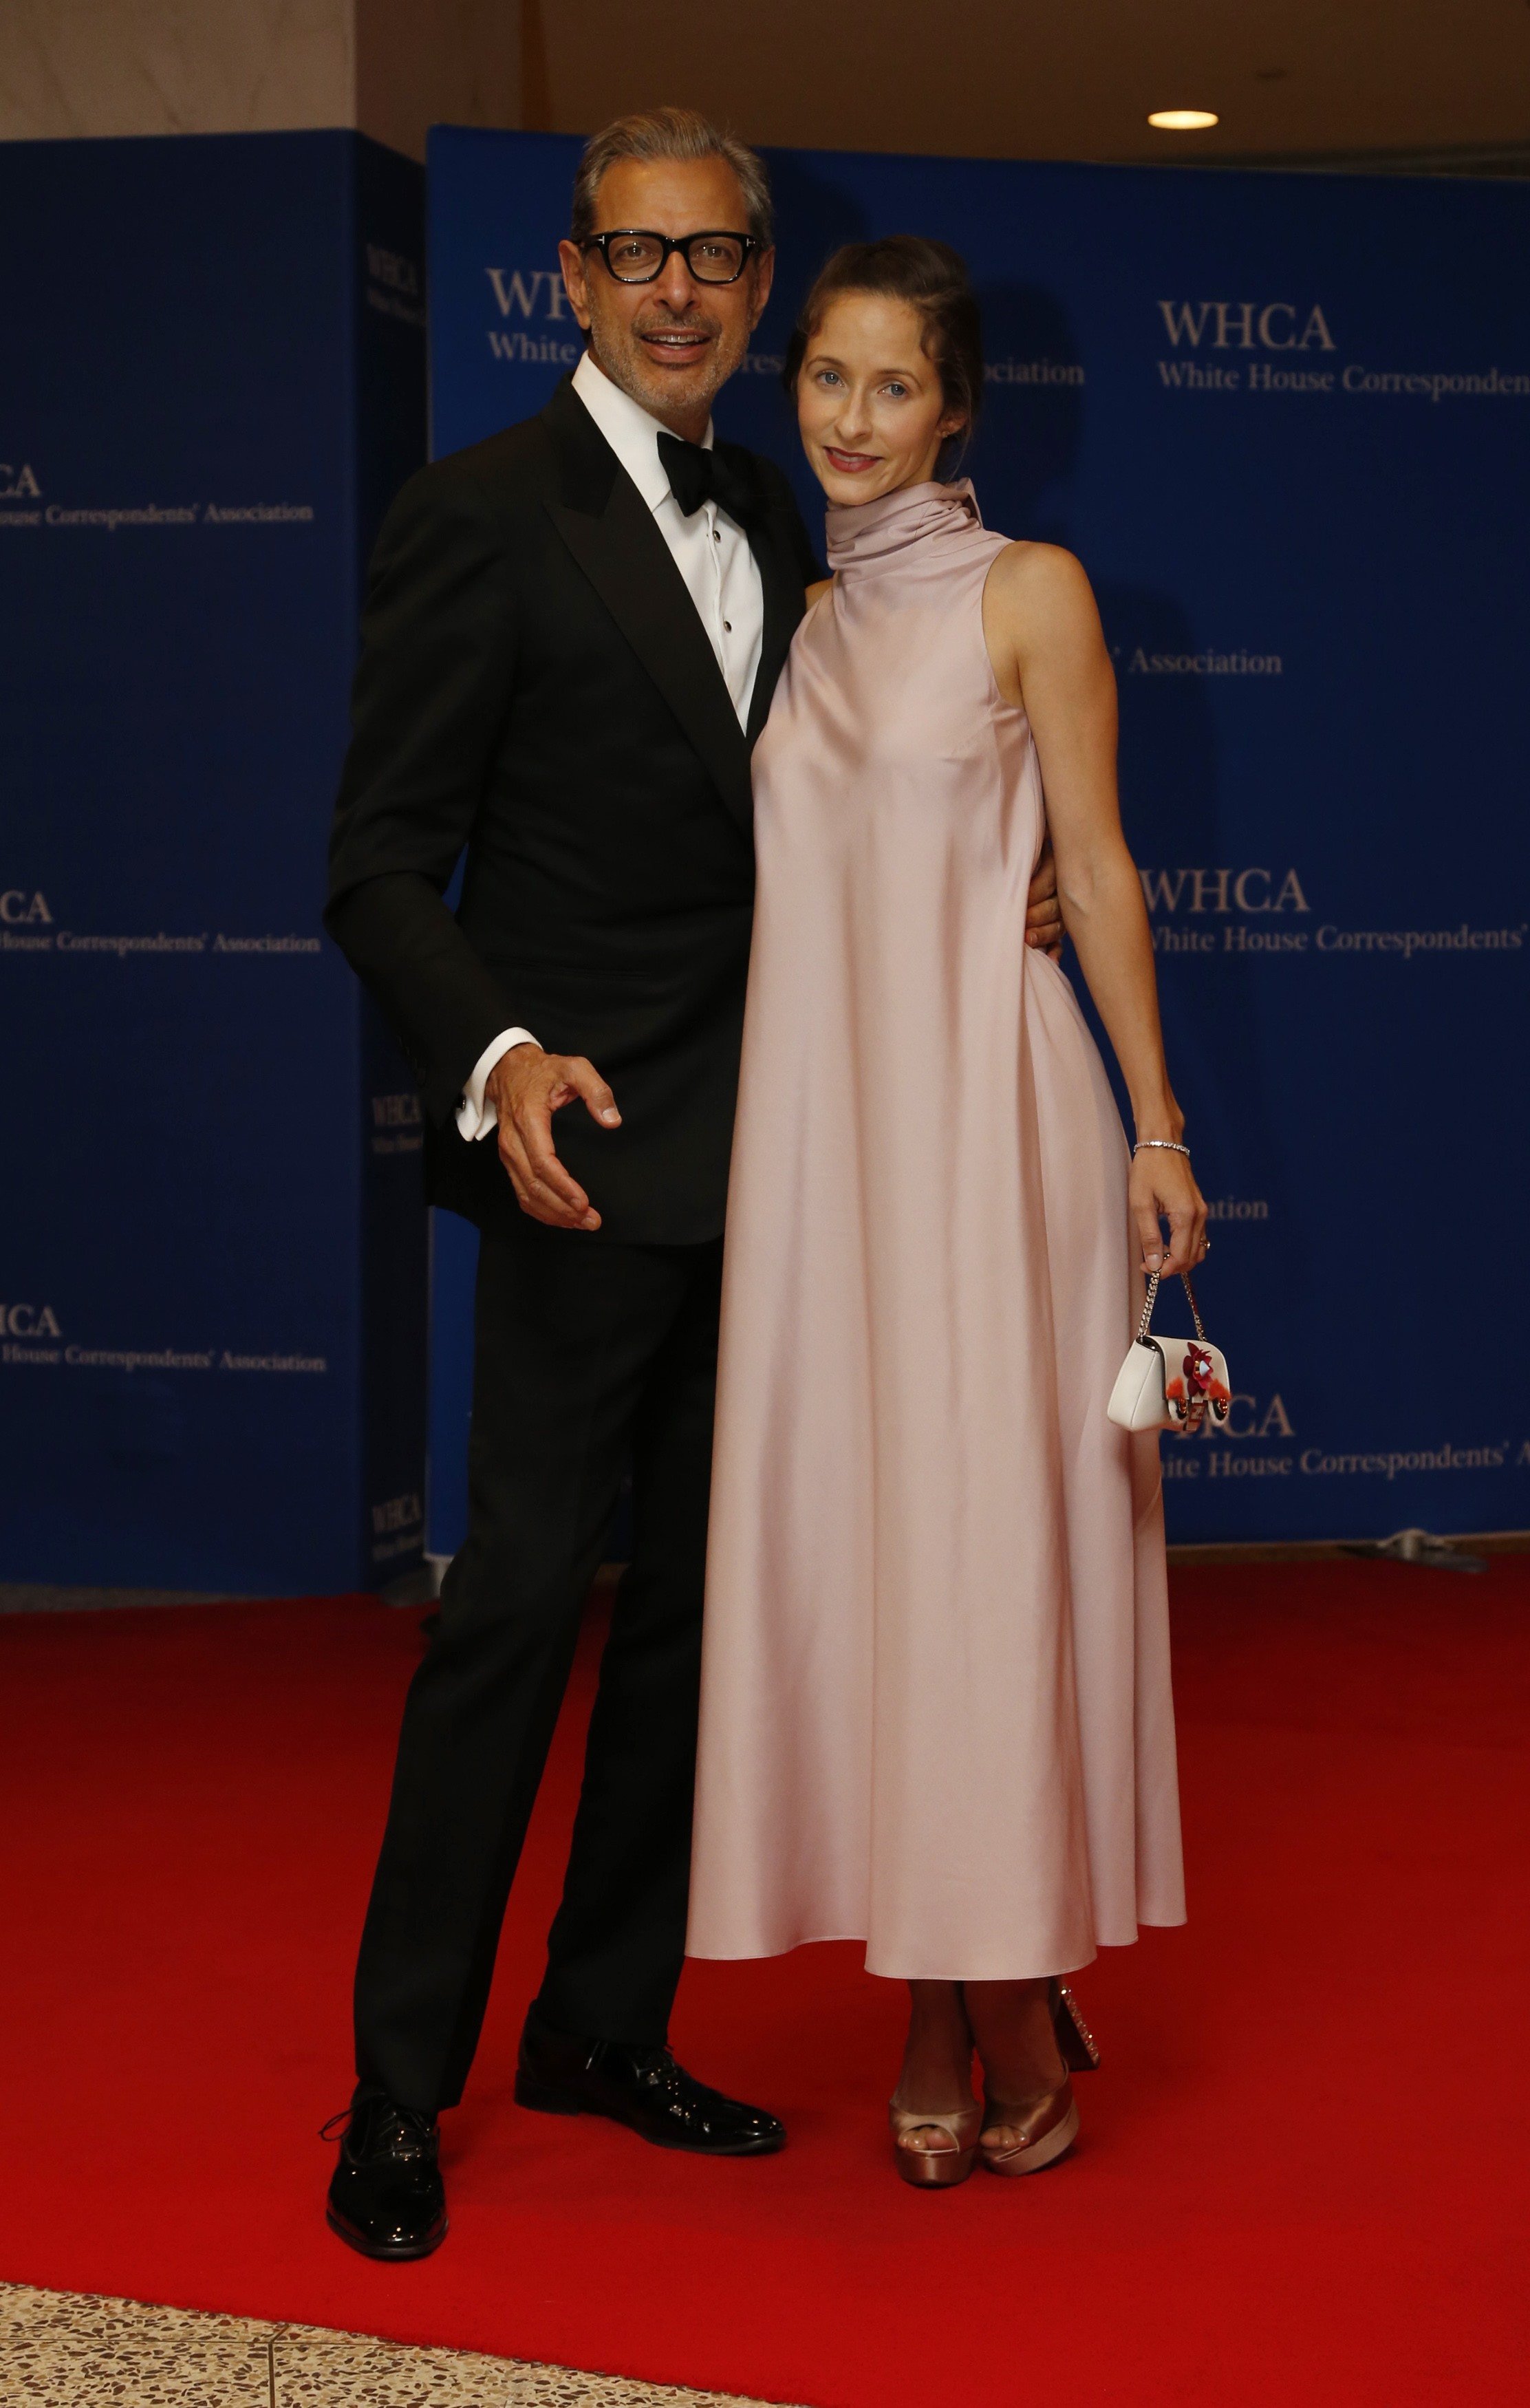 Actor Jeff Goldblum and wife Emilie Livingston attend the White House Correspondents' Association Dinner at the Washington Hilton Hotel in Washington on April 30, 2016.